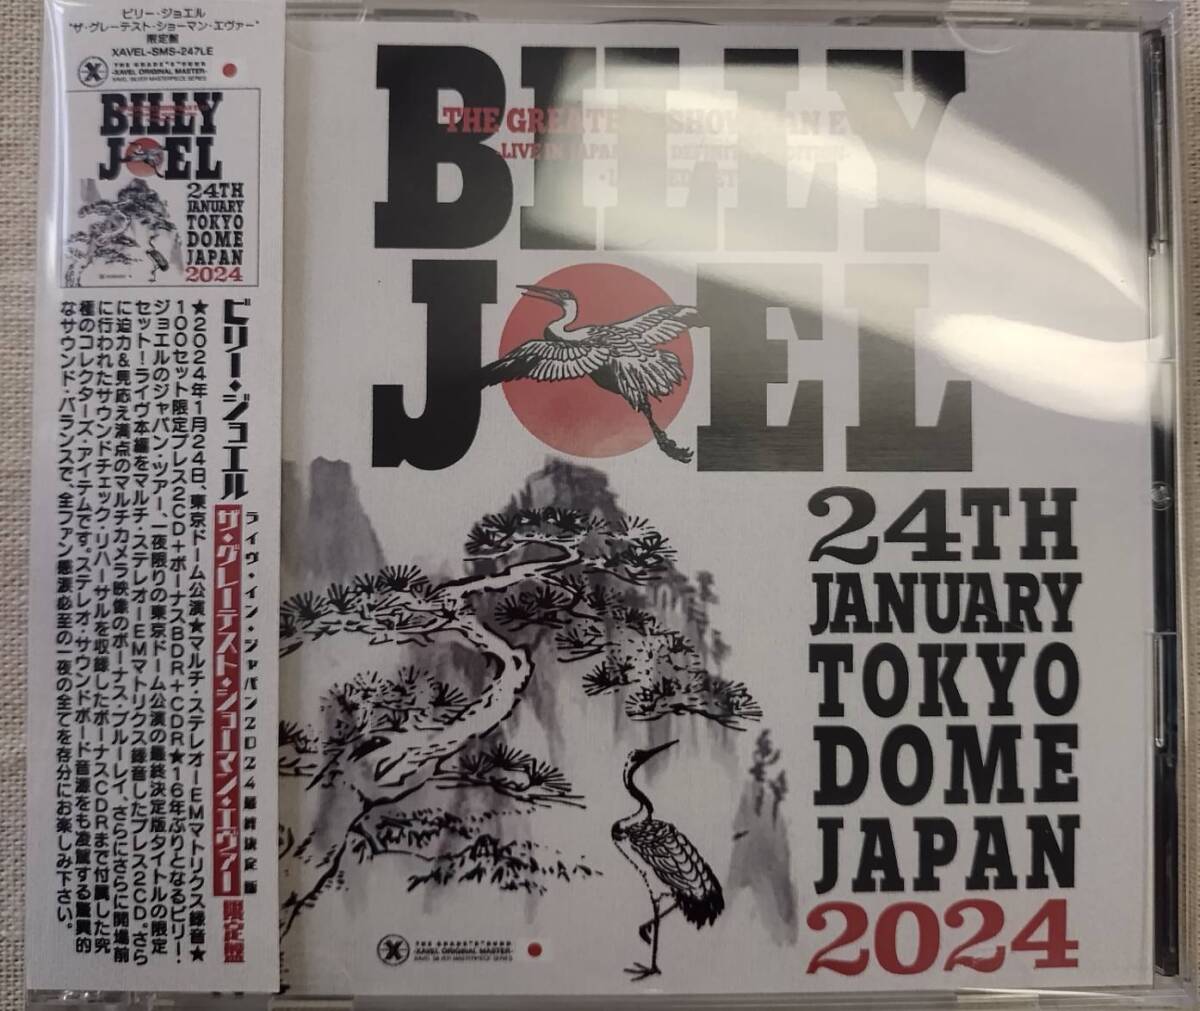 Billy Joel / The Greatest Showman Ever 限定セット ◎XAVELレーベル Live in Japan 2024 Definitive Edition Limited Set_画像1